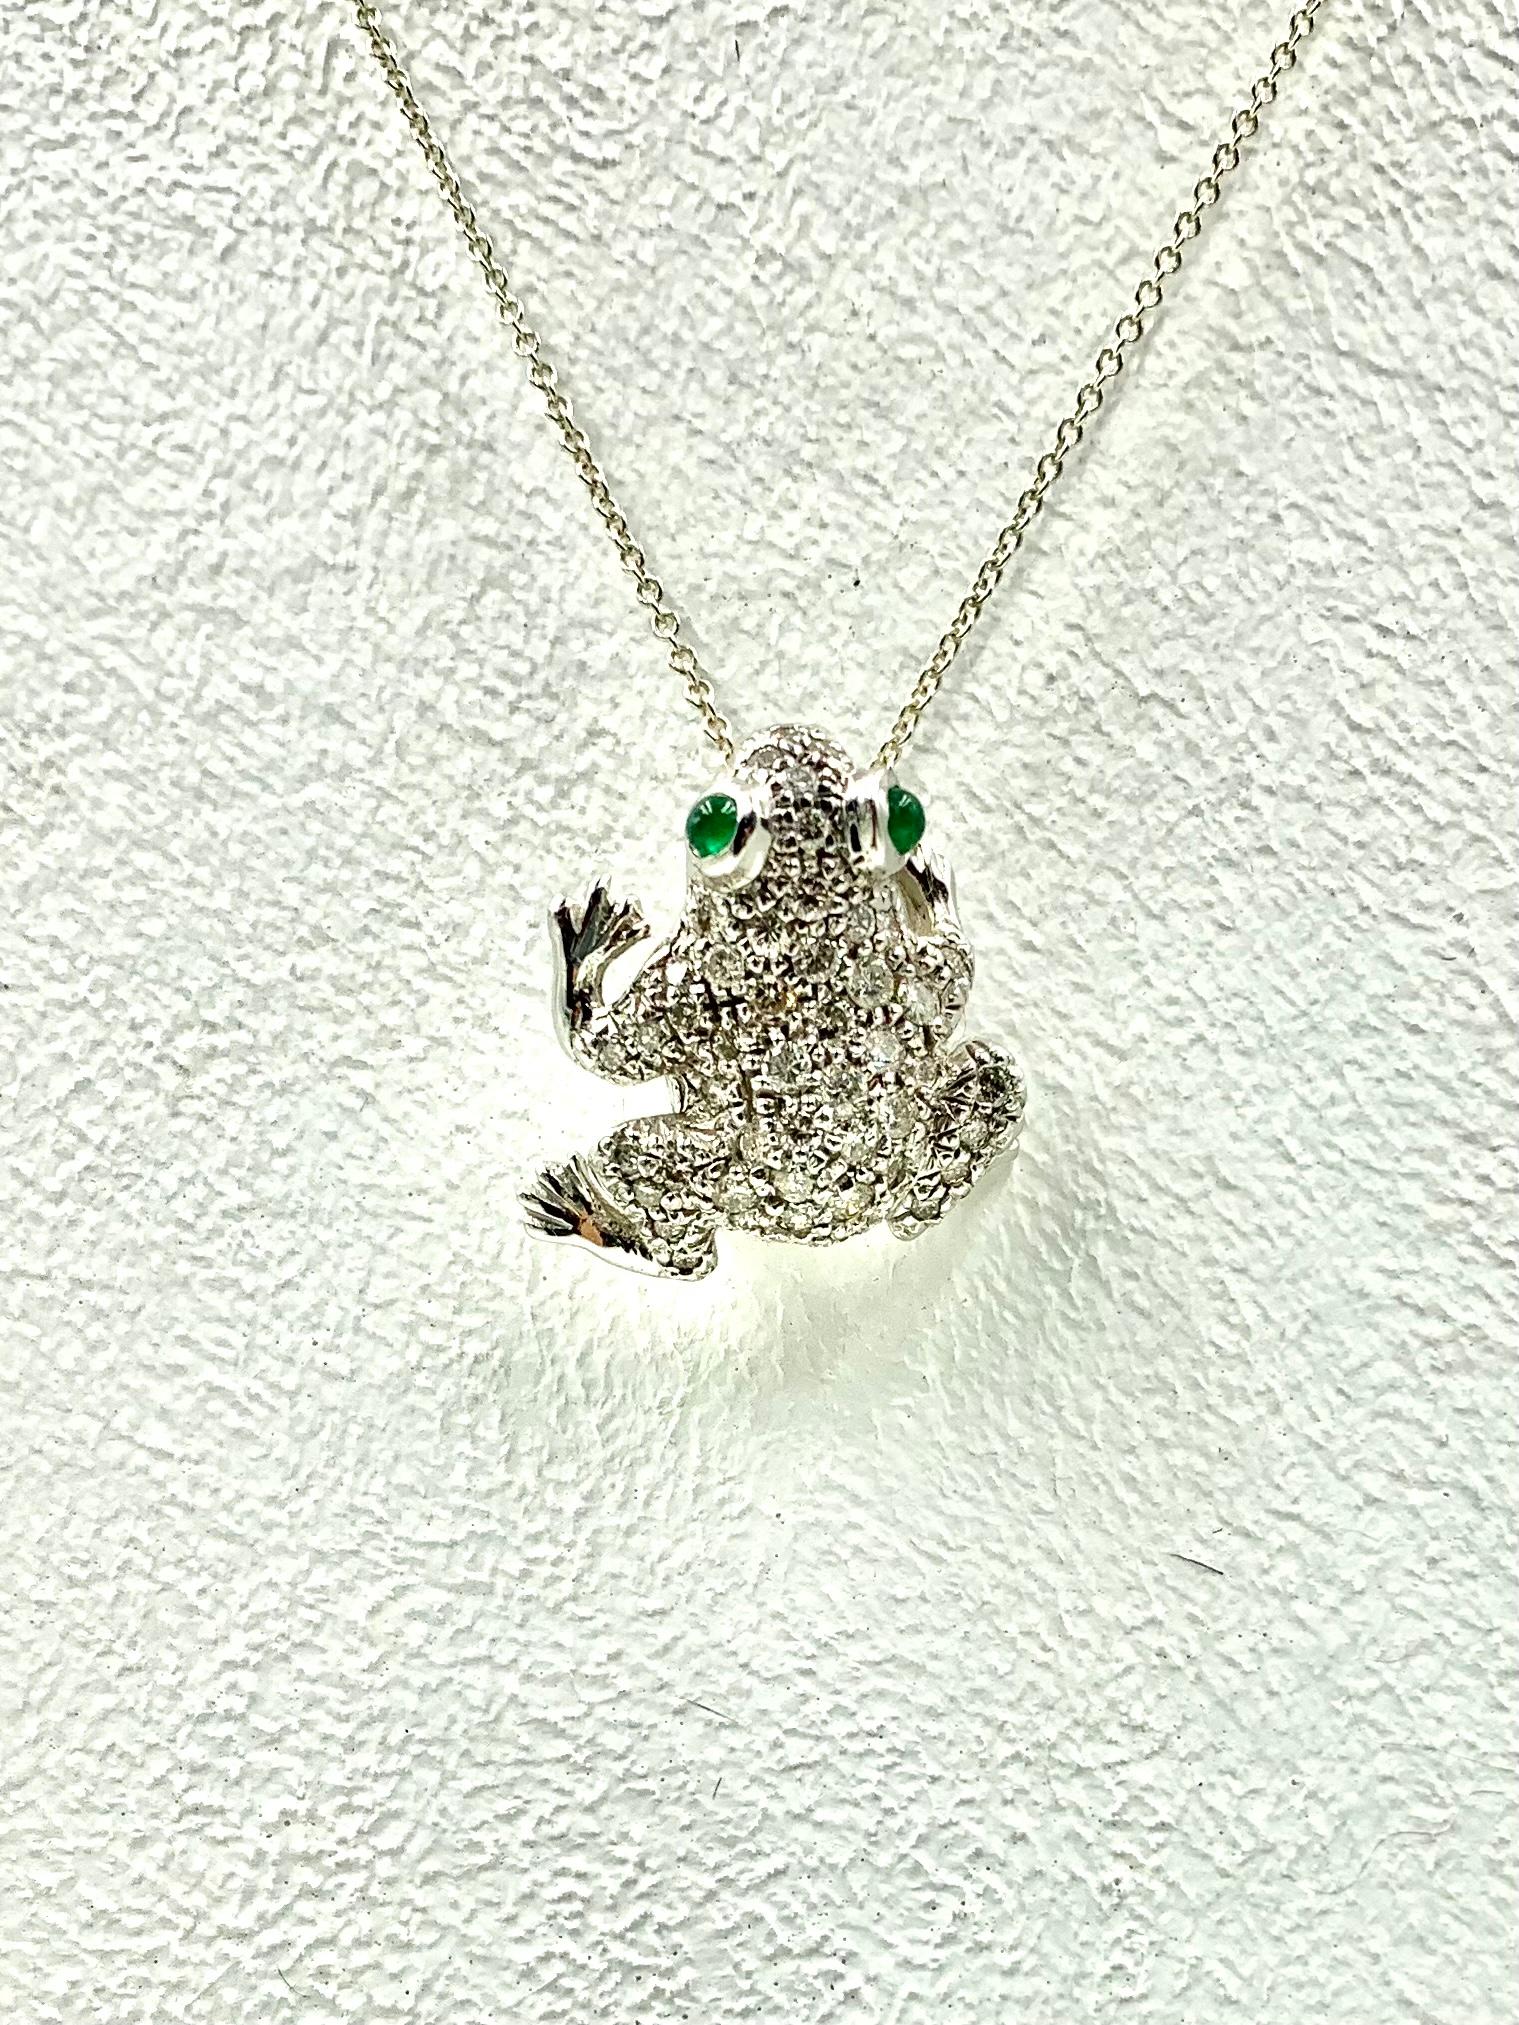 Diamond 18K White Gold Frog Brooch, Pendant with Cabochon Emerald Eyes, Talisman For Sale 2